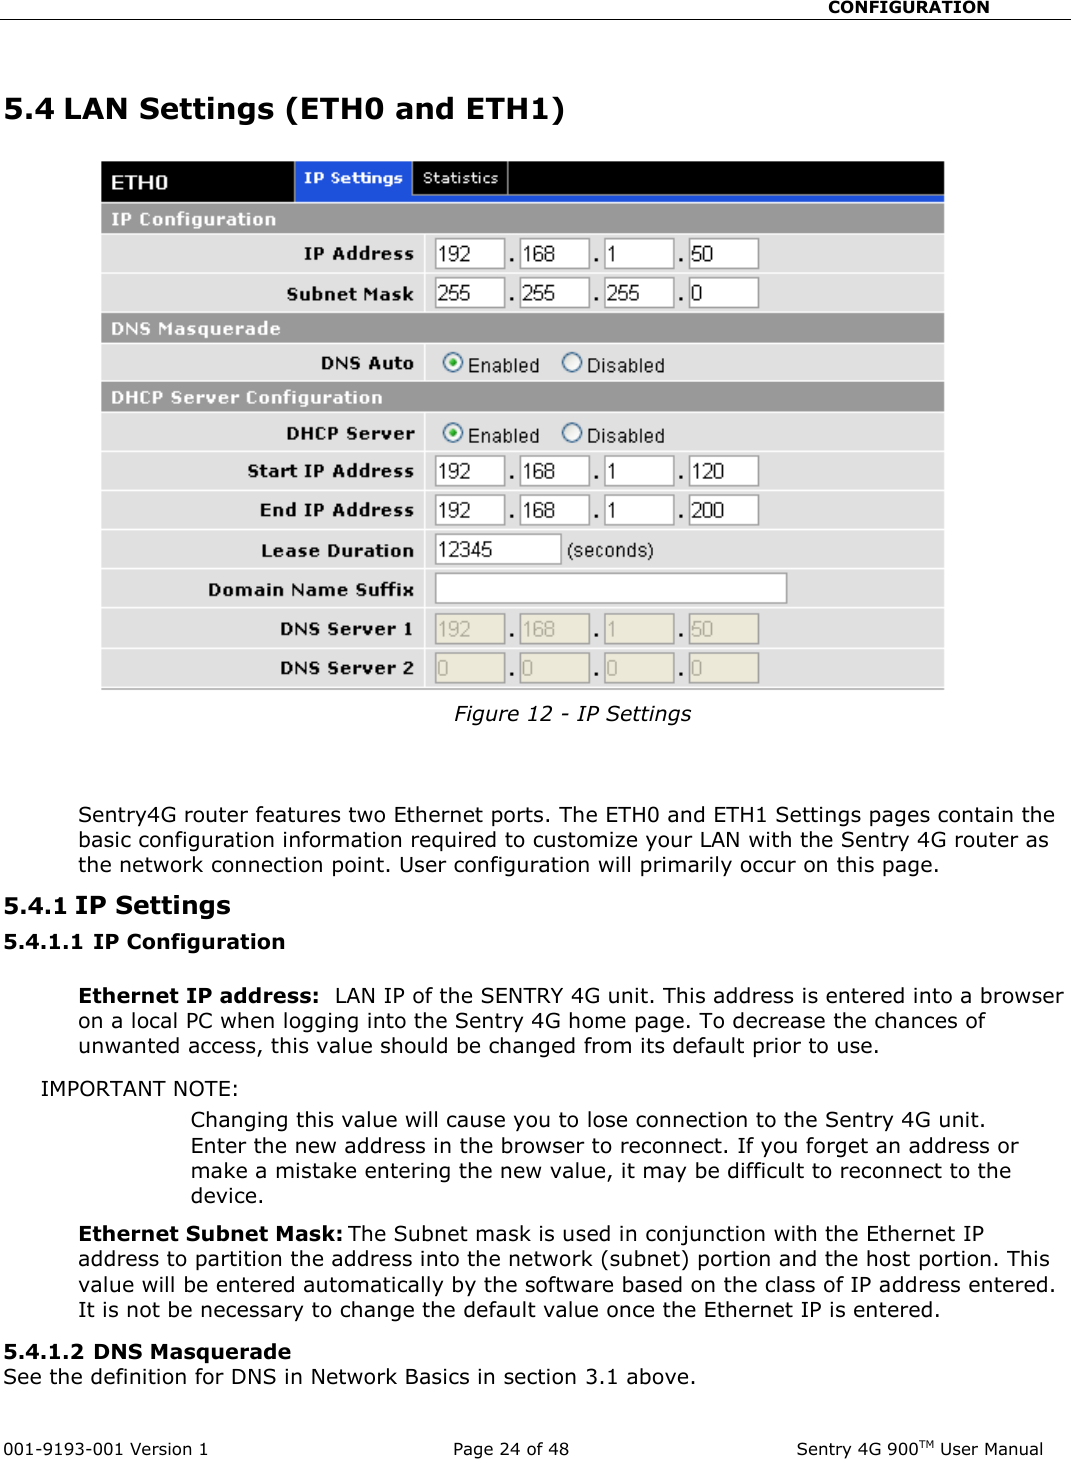                                                       CONFIGURATION  001-9193-001 Version 1              Page 24 of 48               Sentry 4G 900TM User Manual  5.4 LAN Settings (ETH0 and ETH1)  Figure 12 - IP Settings   Sentry4G router features two Ethernet ports. The ETH0 and ETH1 Settings pages contain the basic configuration information required to customize your LAN with the Sentry 4G router as the network connection point. User configuration will primarily occur on this page.  5.4.1 IP Settings  5.4.1.1 IP Configuration  Ethernet IP address:  LAN IP of the SENTRY 4G unit. This address is entered into a browser on a local PC when logging into the Sentry 4G home page. To decrease the chances of unwanted access, this value should be changed from its default prior to use.   IMPORTANT NOTE:   Changing this value will cause you to lose connection to the Sentry 4G unit. Enter the new address in the browser to reconnect. If you forget an address or make a mistake entering the new value, it may be difficult to reconnect to the device.   Ethernet Subnet Mask: The Subnet mask is used in conjunction with the Ethernet IP address to partition the address into the network (subnet) portion and the host portion. This value will be entered automatically by the software based on the class of IP address entered.  It is not be necessary to change the default value once the Ethernet IP is entered.   5.4.1.2 DNS Masquerade  See the definition for DNS in Network Basics in section 3.1 above. 